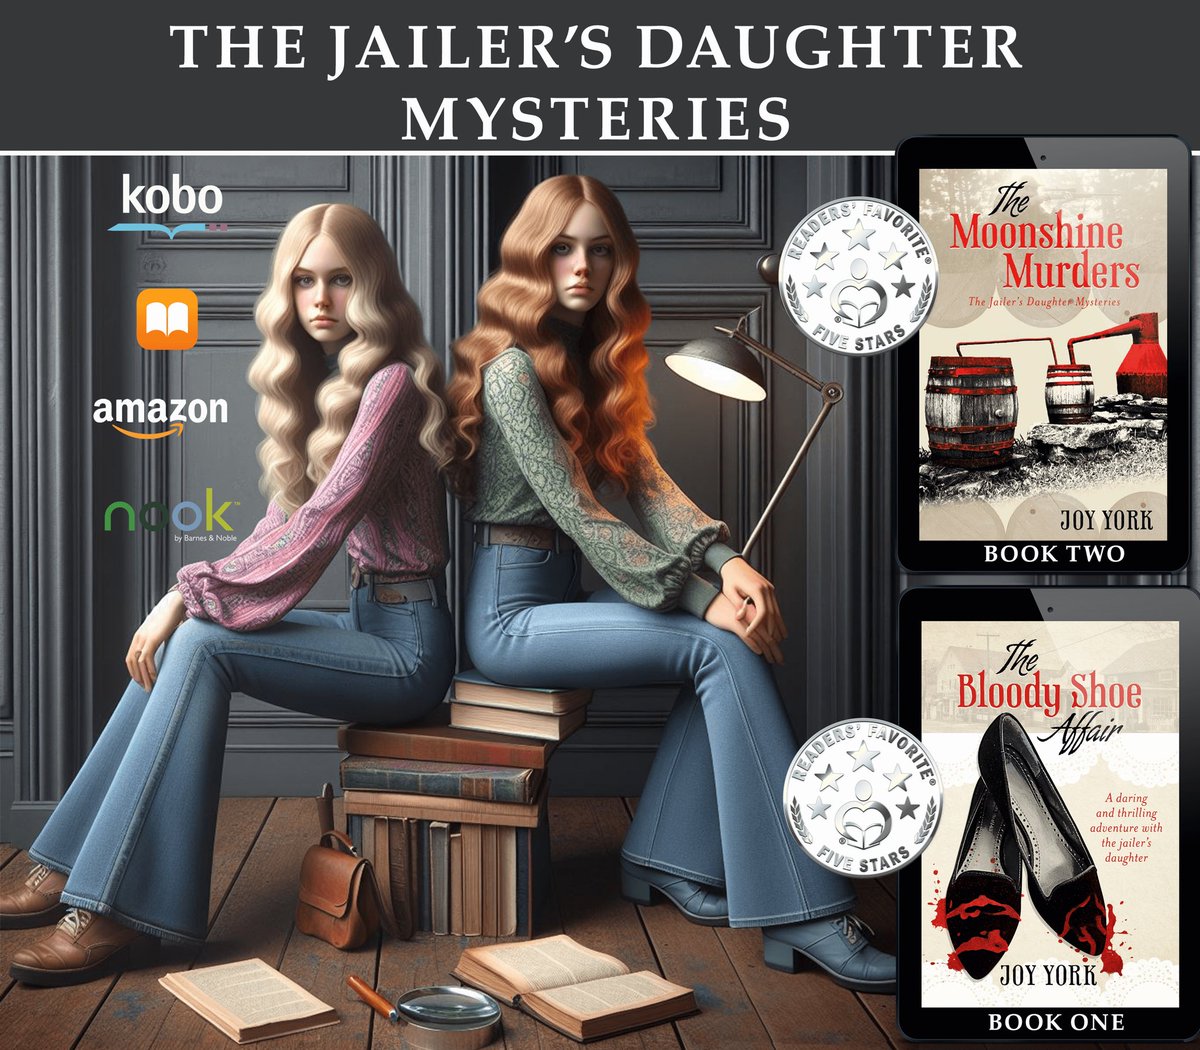 Discover the adventures of two amateur sleuth teens, Lily and Christi, as they seek justice in a rural southern town in 1968 and 1970. 

Humor, fun, suspense, and historical charm.
For fans who enjoy Nancy Drew. 
#mystery #southernmystery #YA 

amazon.com/Bloody-Shoe-Af……